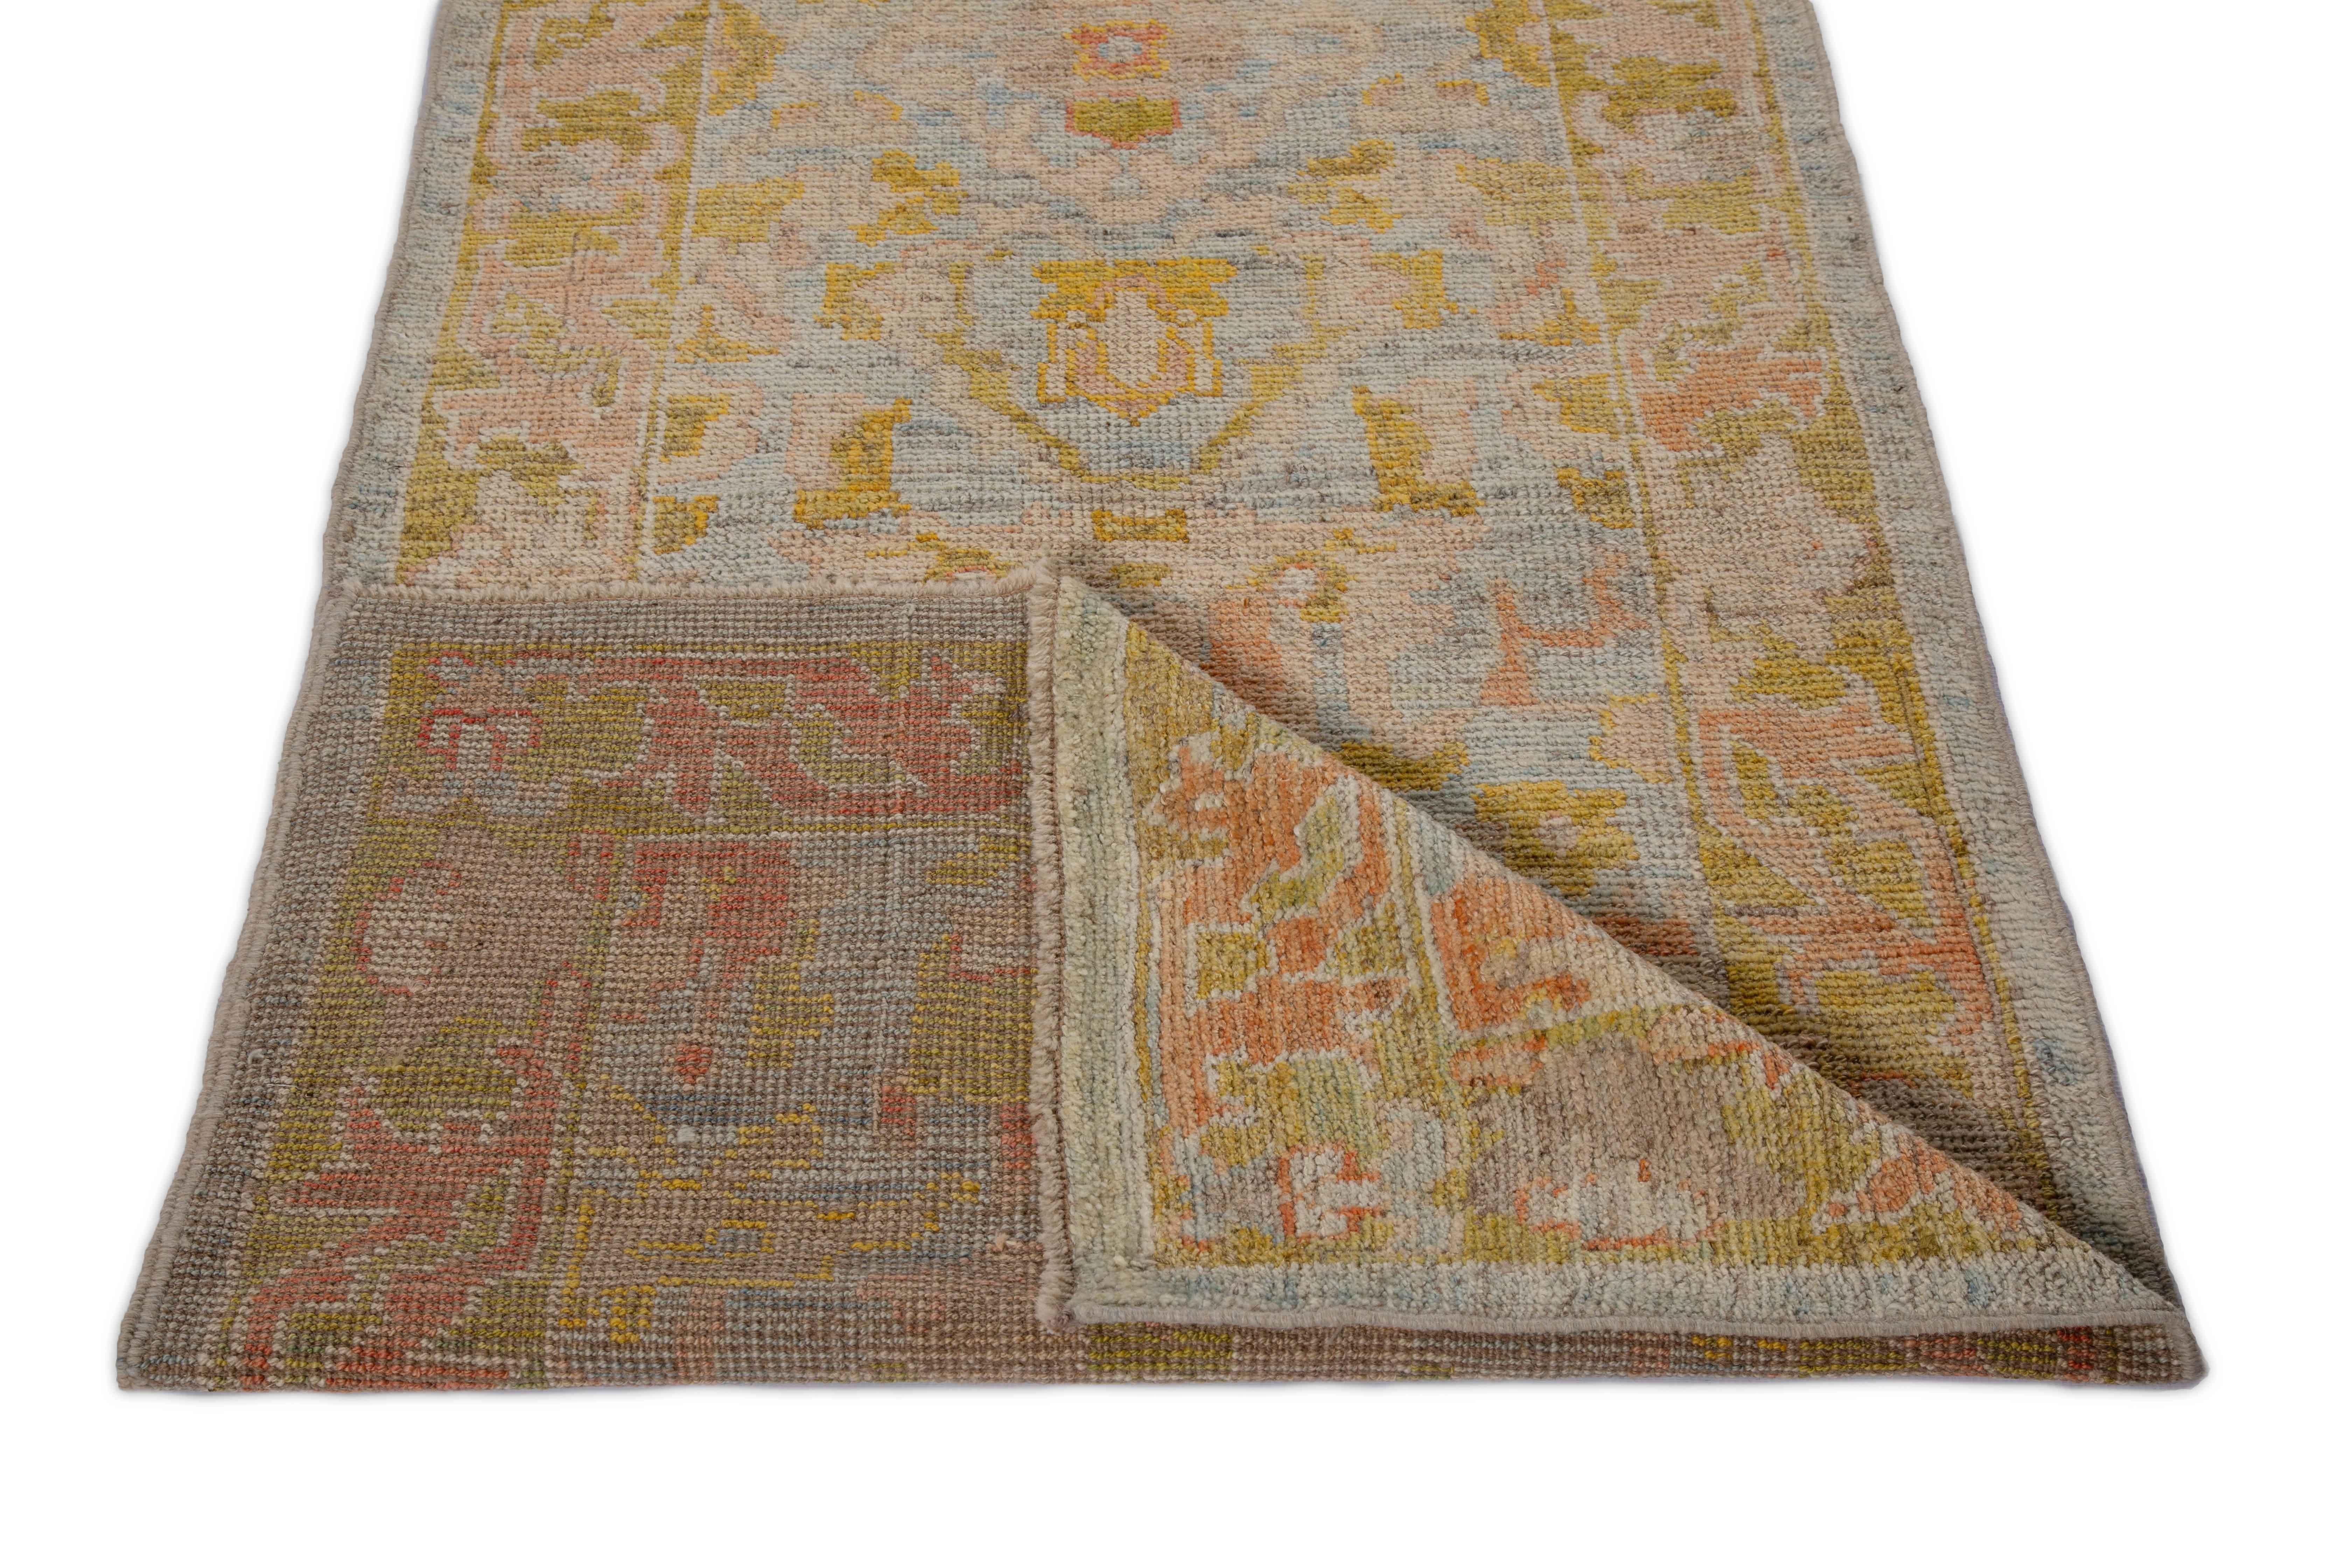 Hand-Woven Contemporary Oushak Runner Rug from Turkey with Gold and Pink Floral Patterns